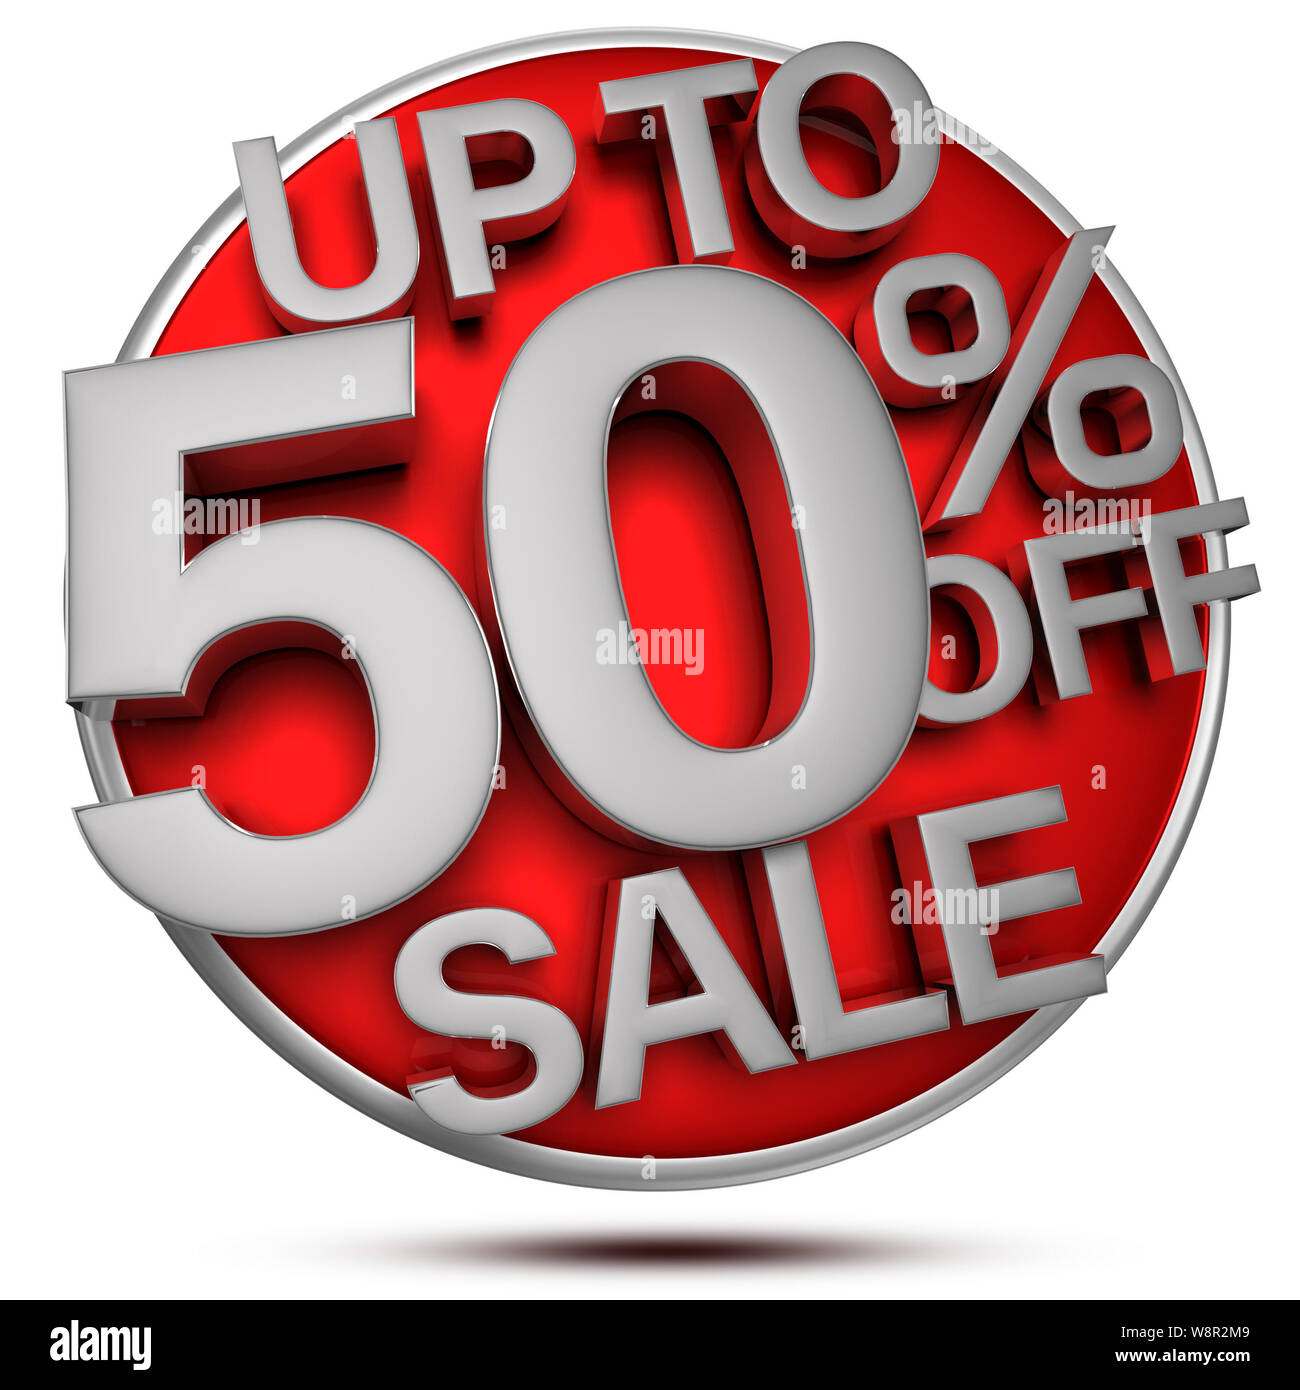 Fifty Percent Off Sale Coupon Stock Photo by ©mybaitshop 42304991